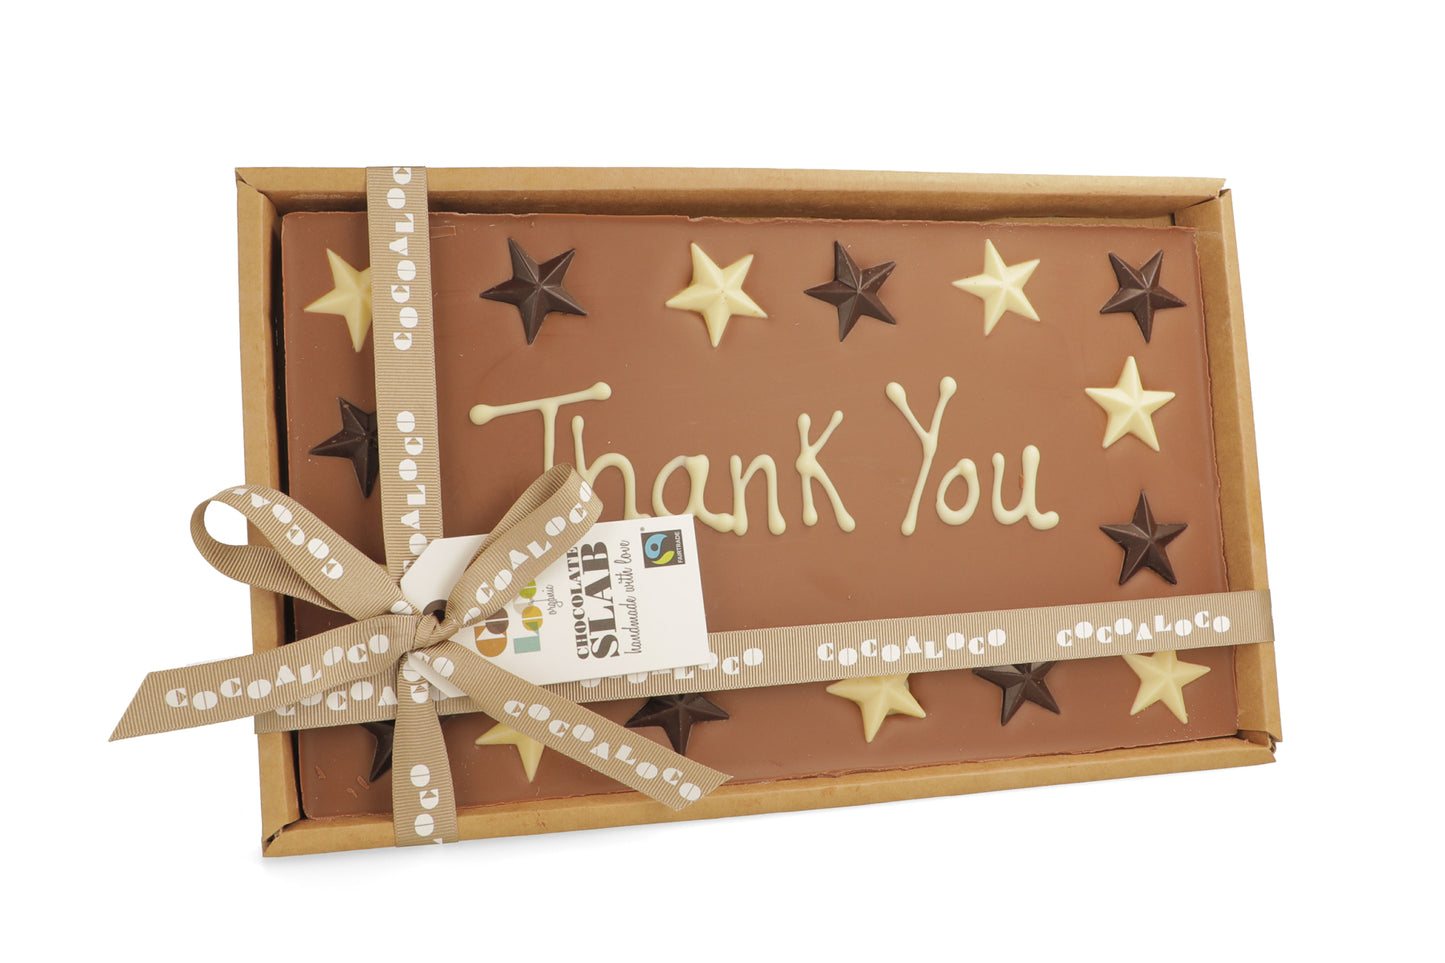 'Thank You' 500g Message Slab